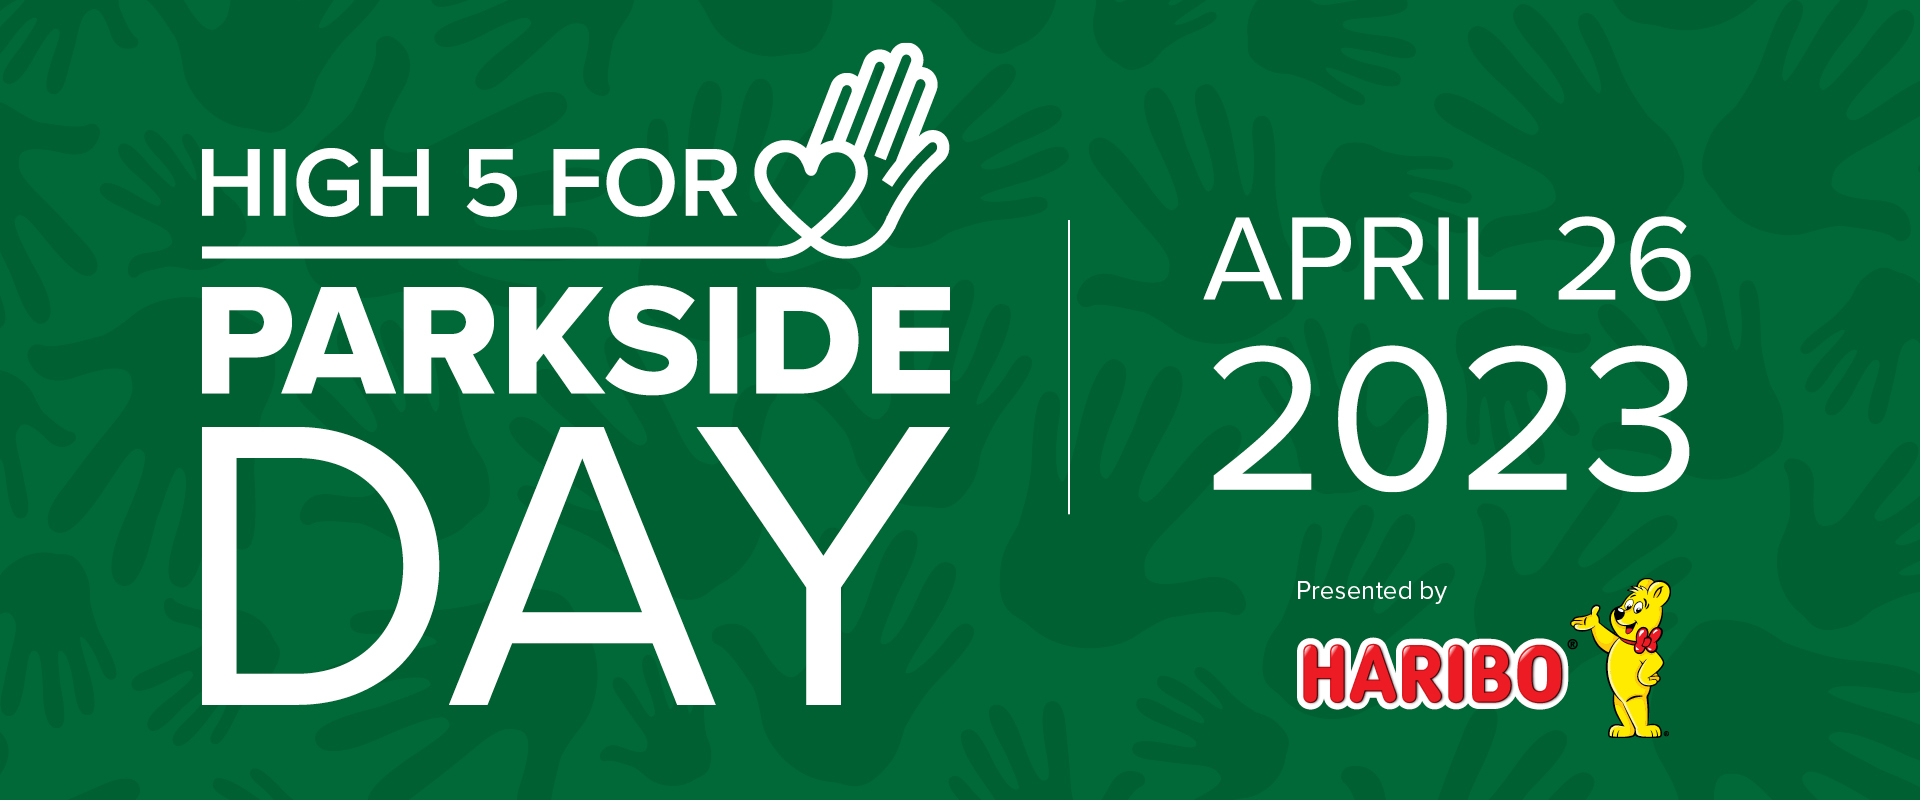 High five branding for Parkside day 